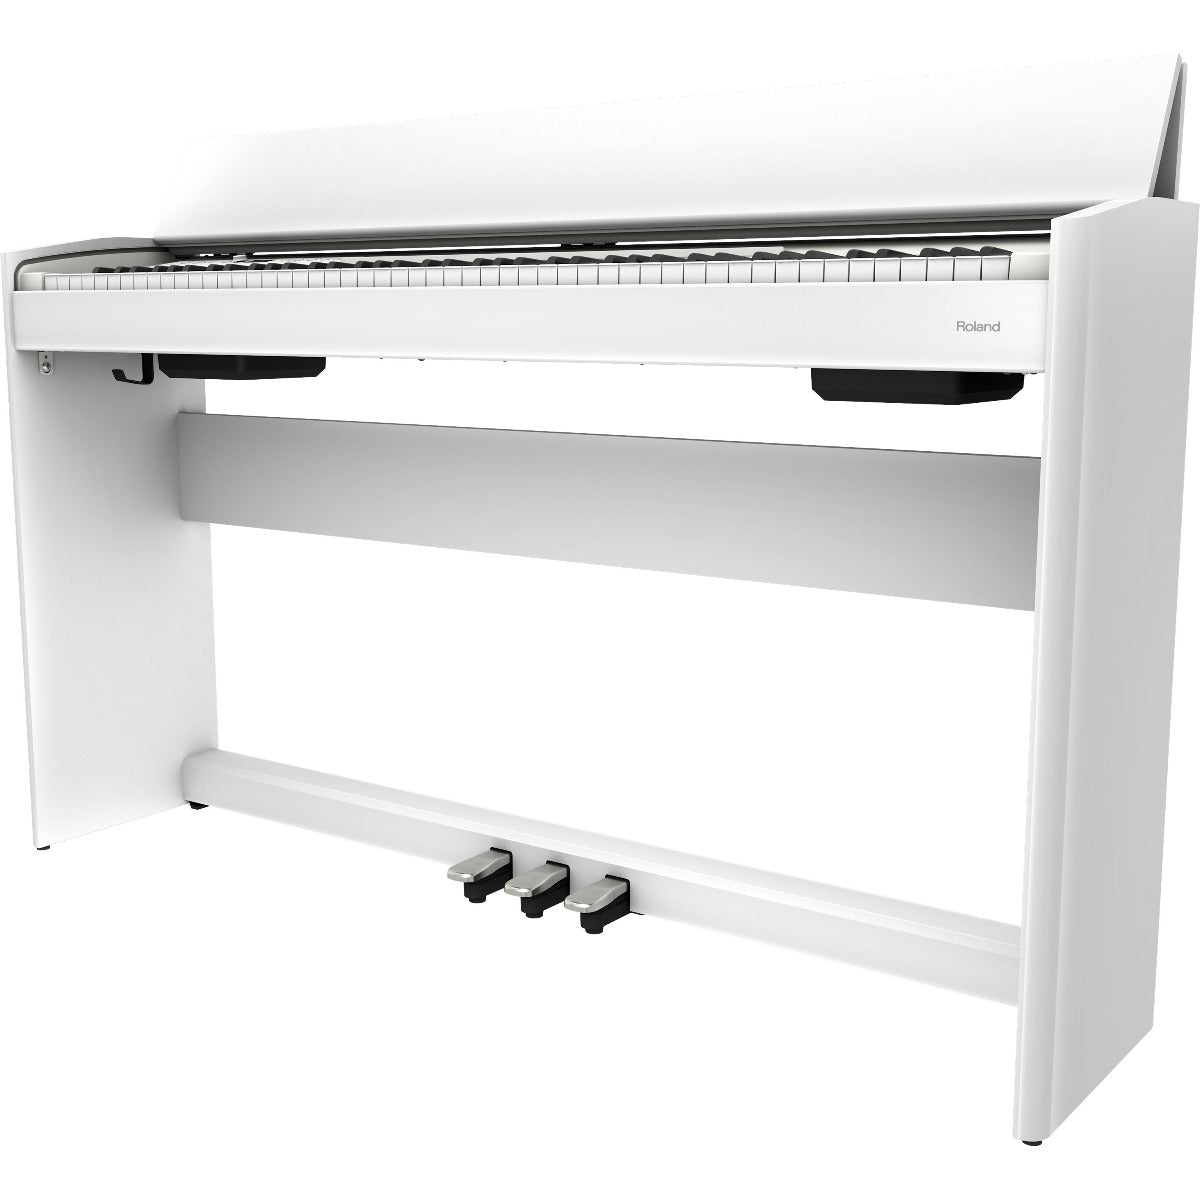 Perspective view of Roland F701 Digital Piano - White showing front and right side